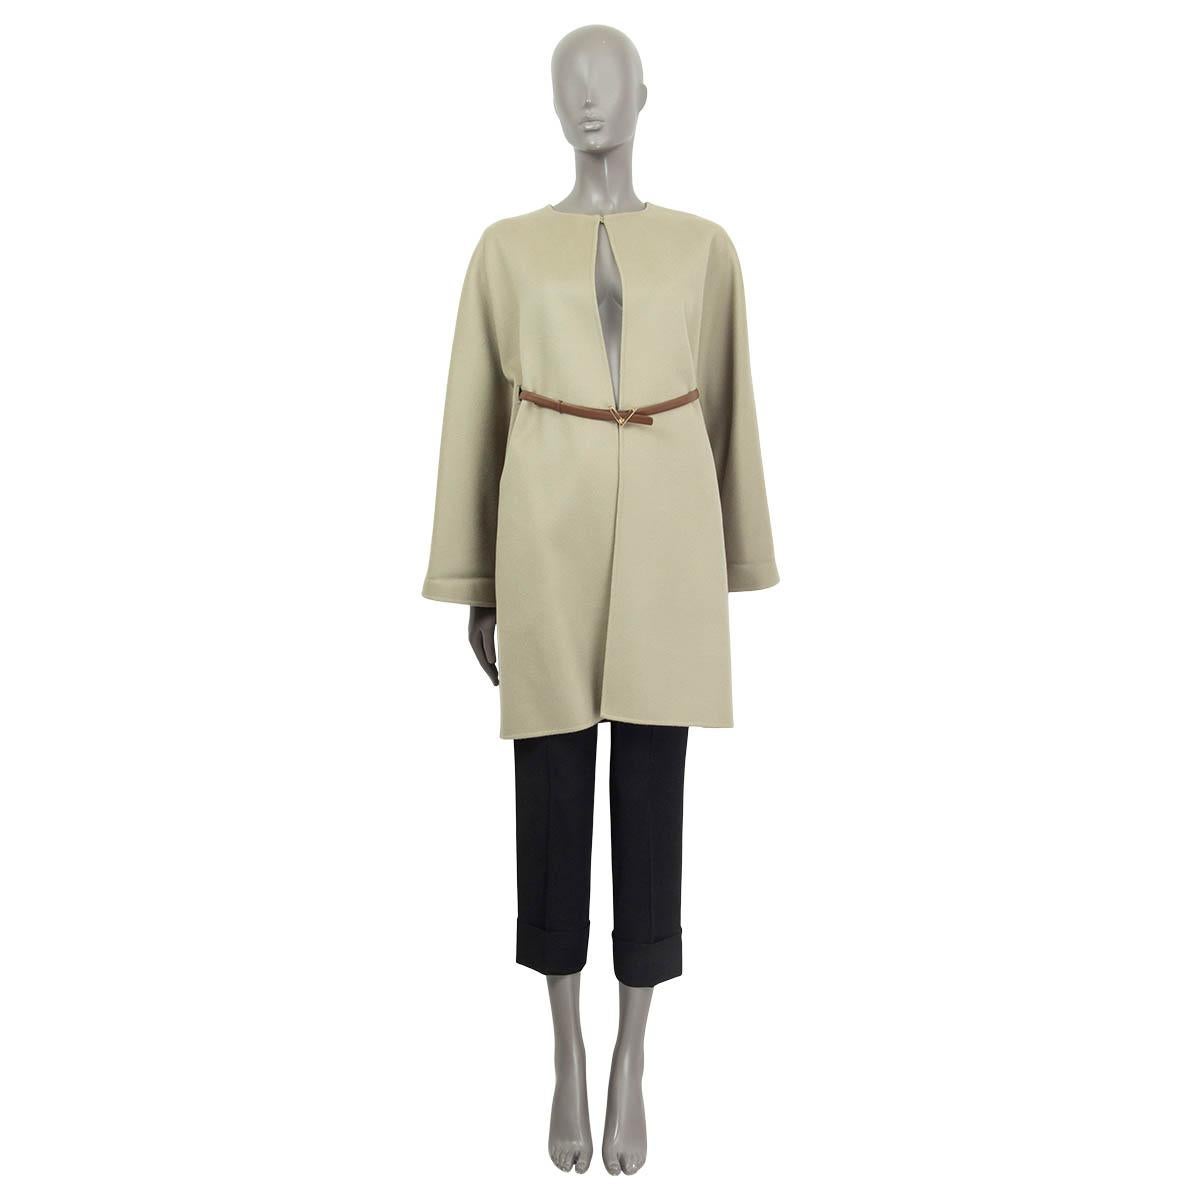 100% authentic Valentino between seasons coat in pale sage green virgin wool (95%) and cashmere (5%). Features a a brown 'V' belt in cowhide (100%) and two side slit pockets. Opens with one hook at the round neck. Pockets lined in pale sage green